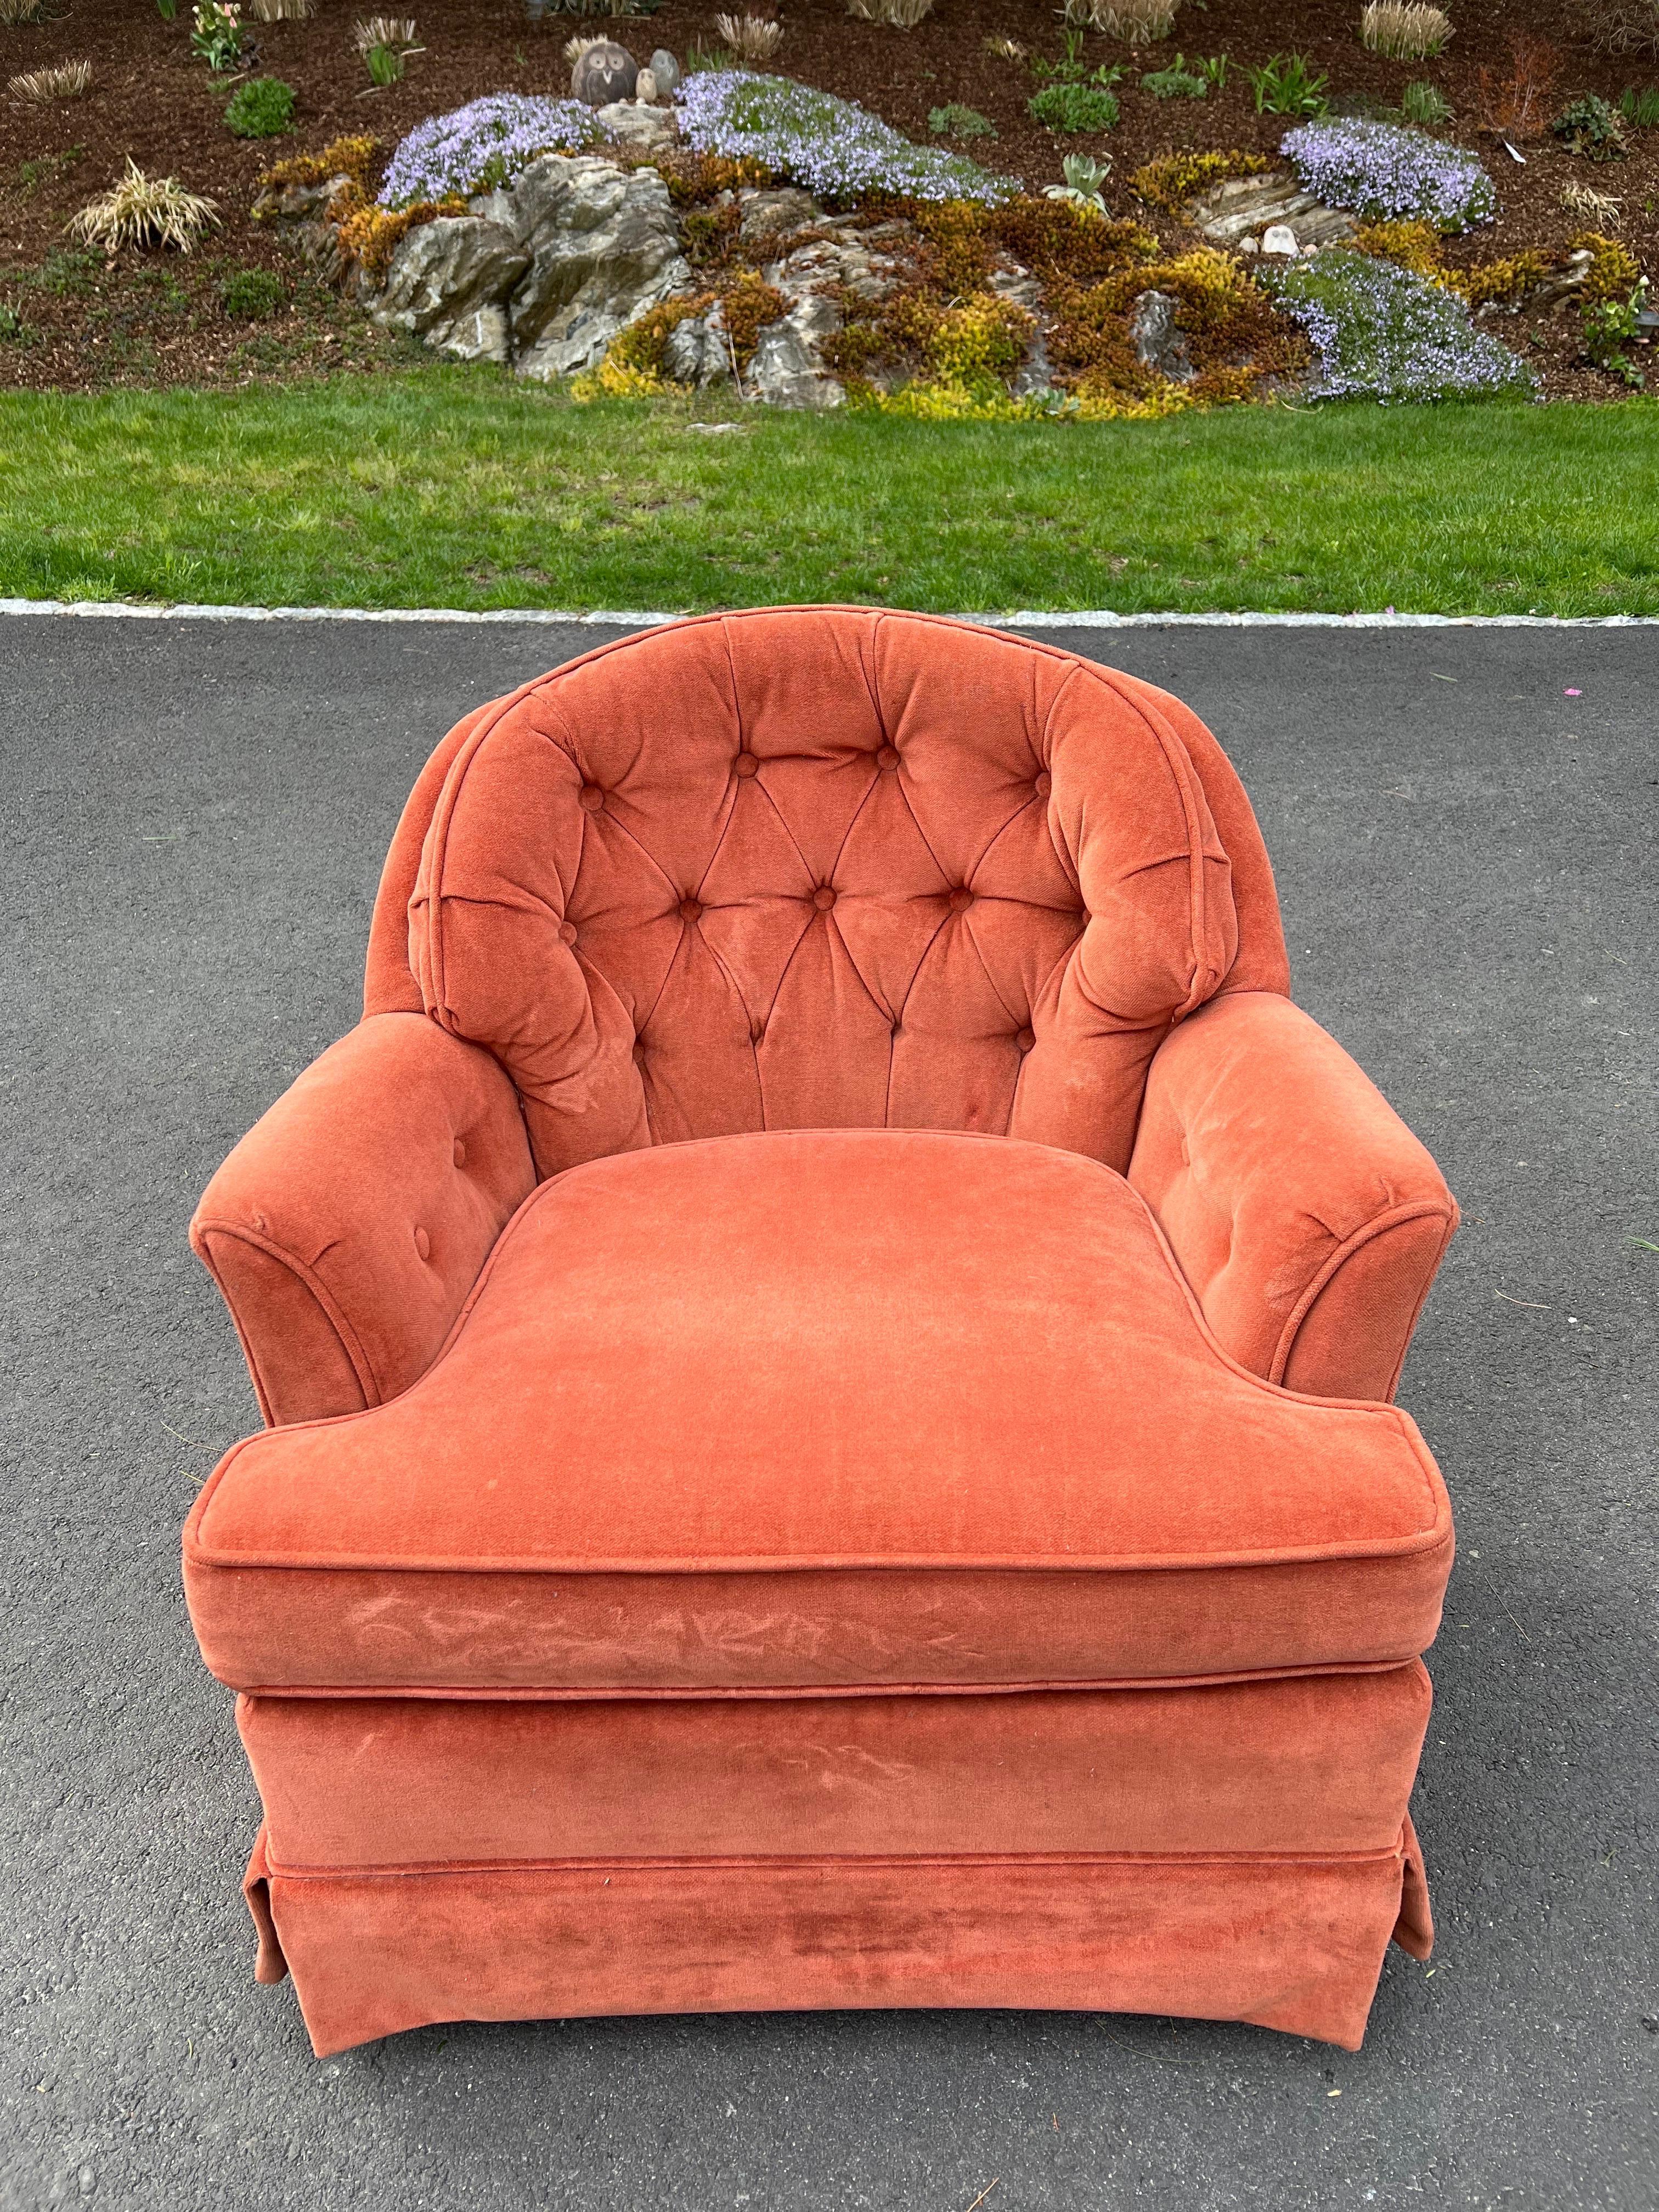 Ethan Allen round back tufted swivel chair in salmon tone velvet fabric. Wear consistent with age and use, some light stains to fabric. Could use a recover.
Measures approximately 28.25